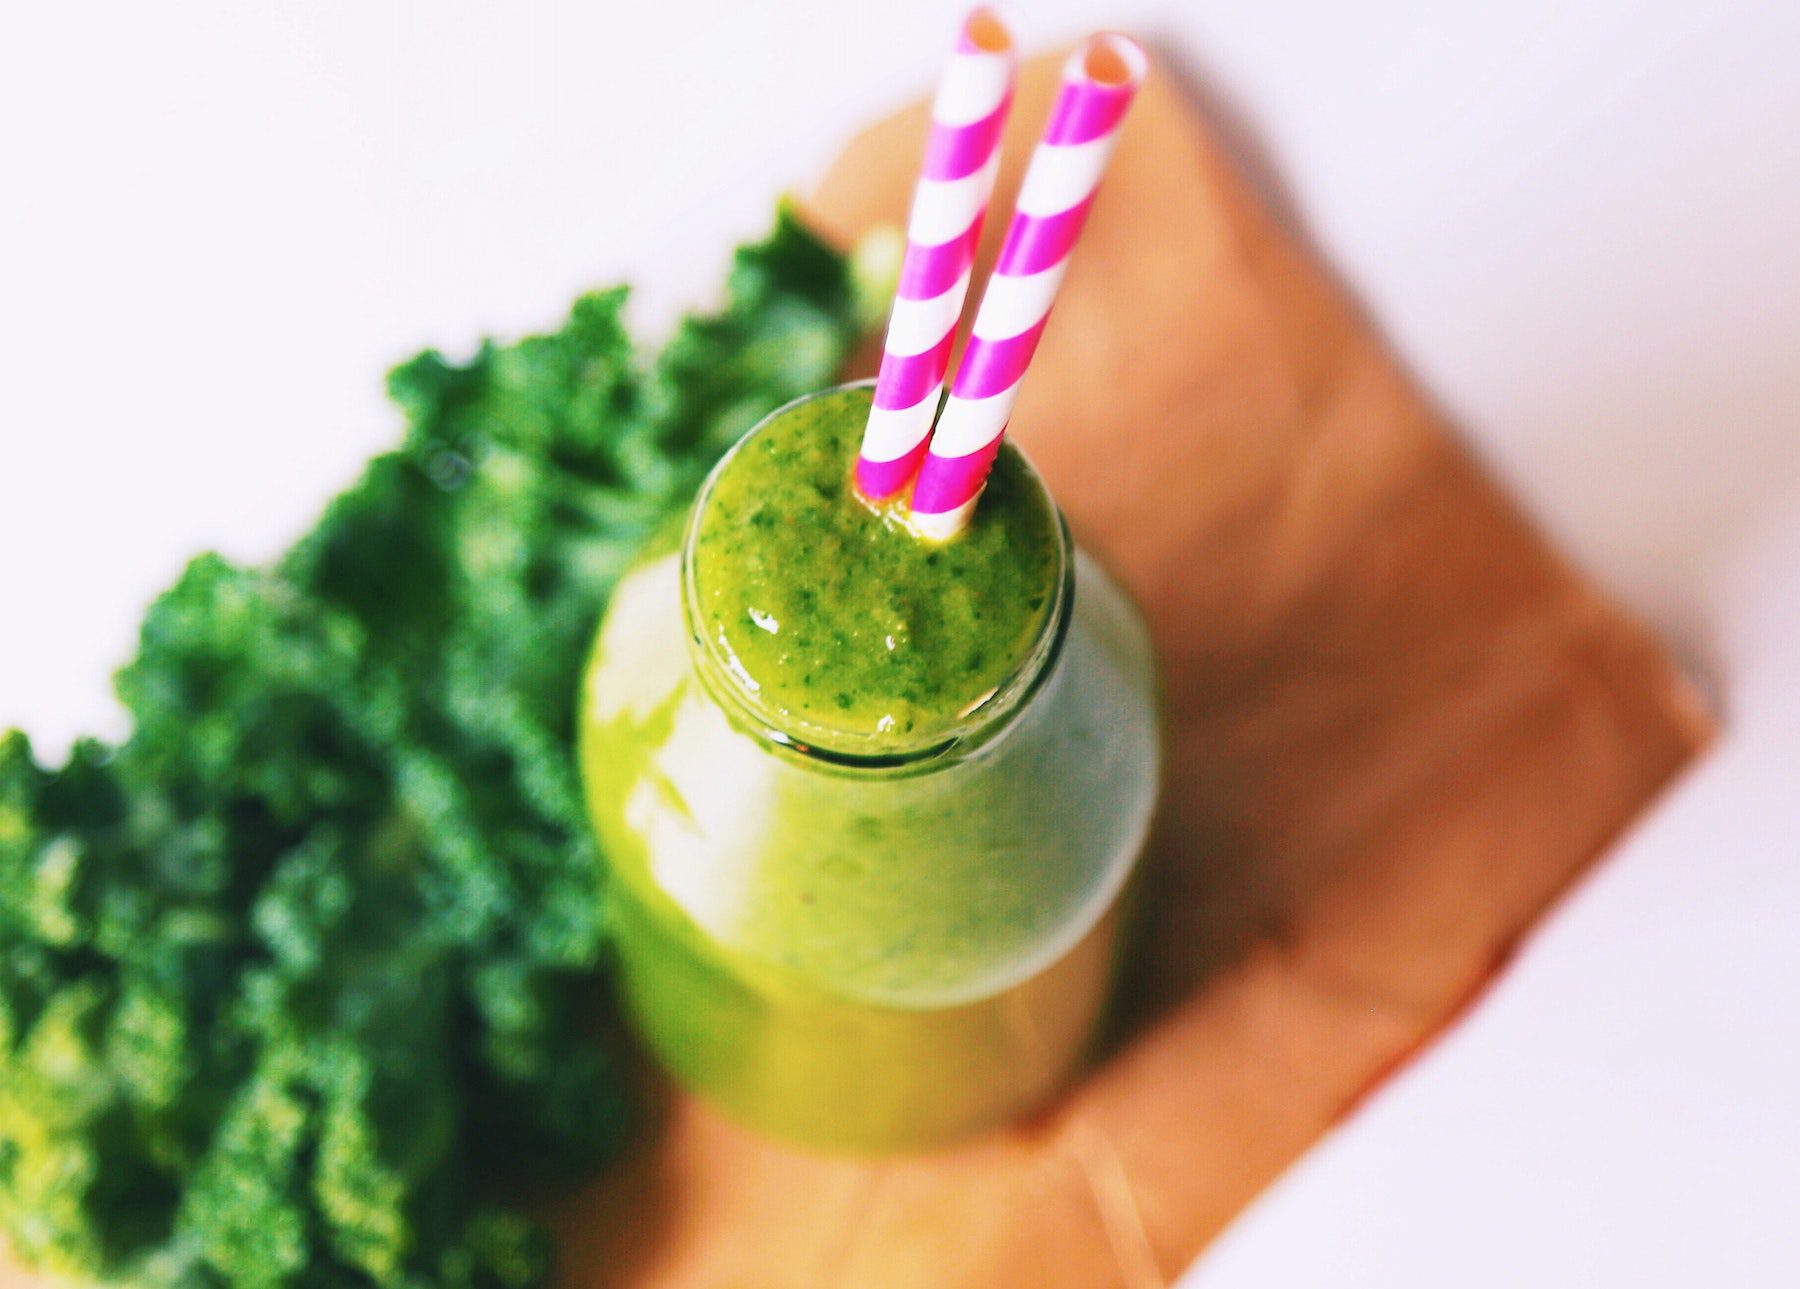 A kale smoothie with fresh kale on a cutting board, with two pink paper straws inserted.